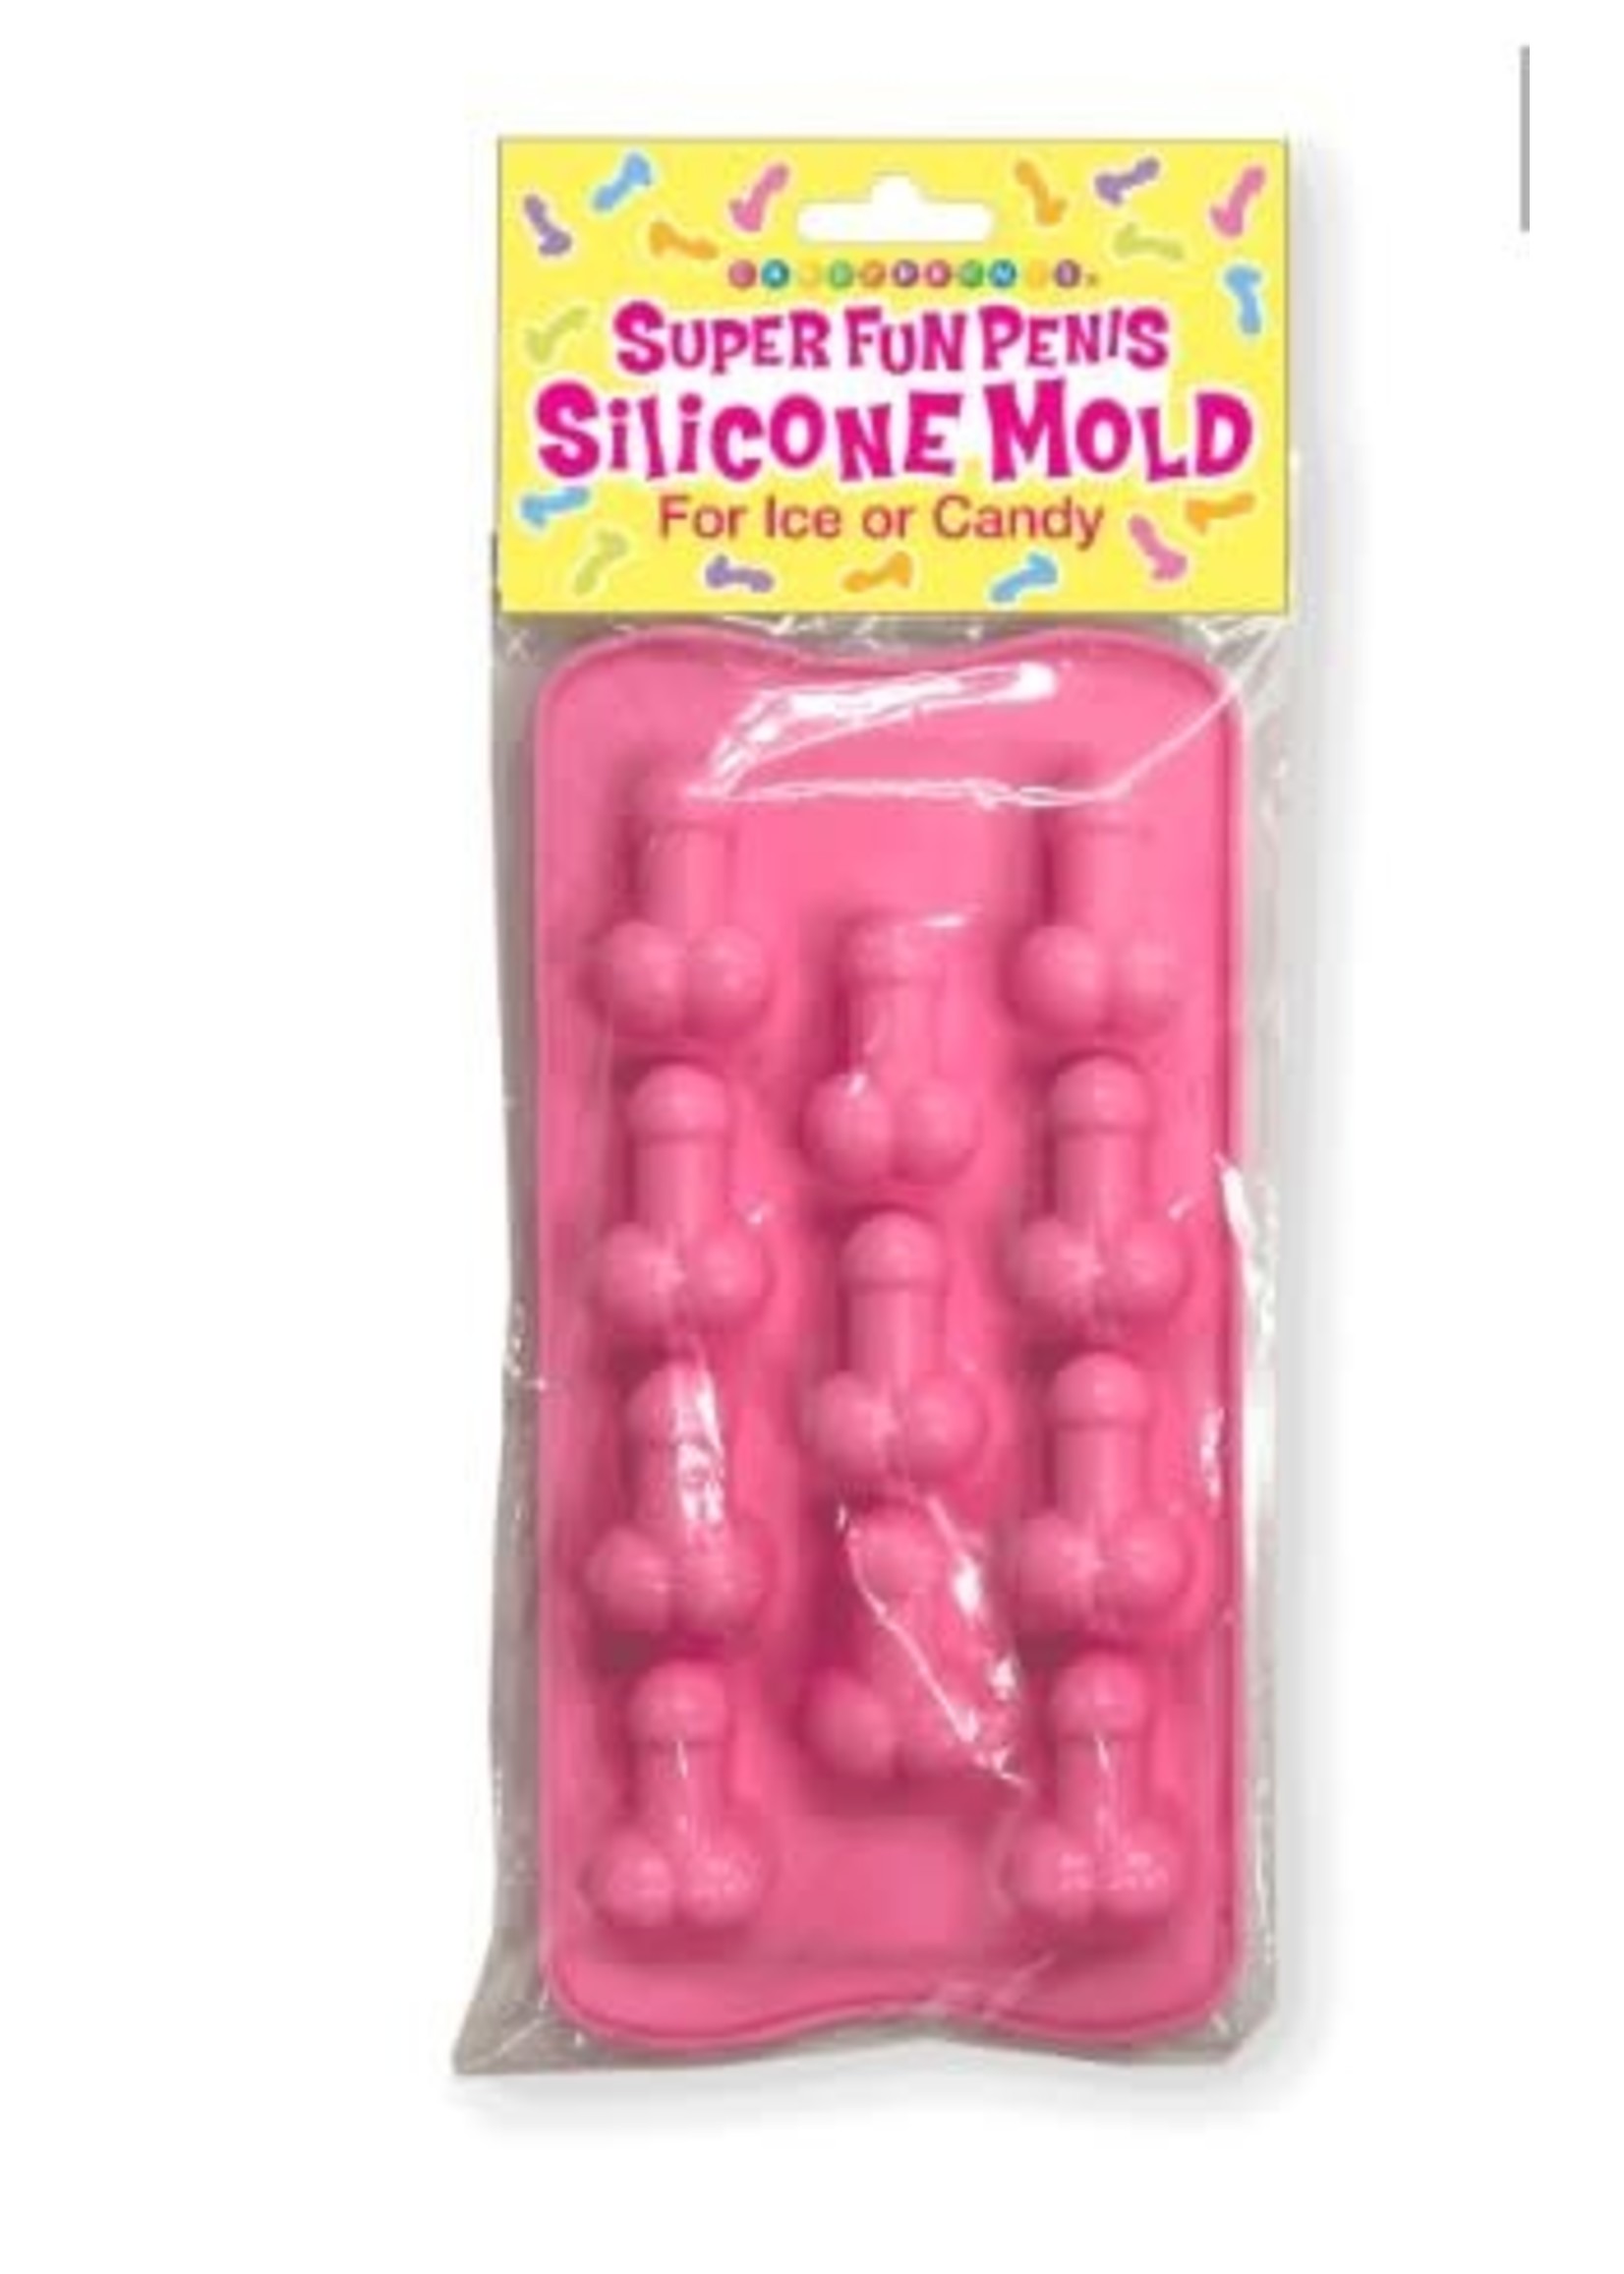 I'm very excited about my penis mold. : r/Baking